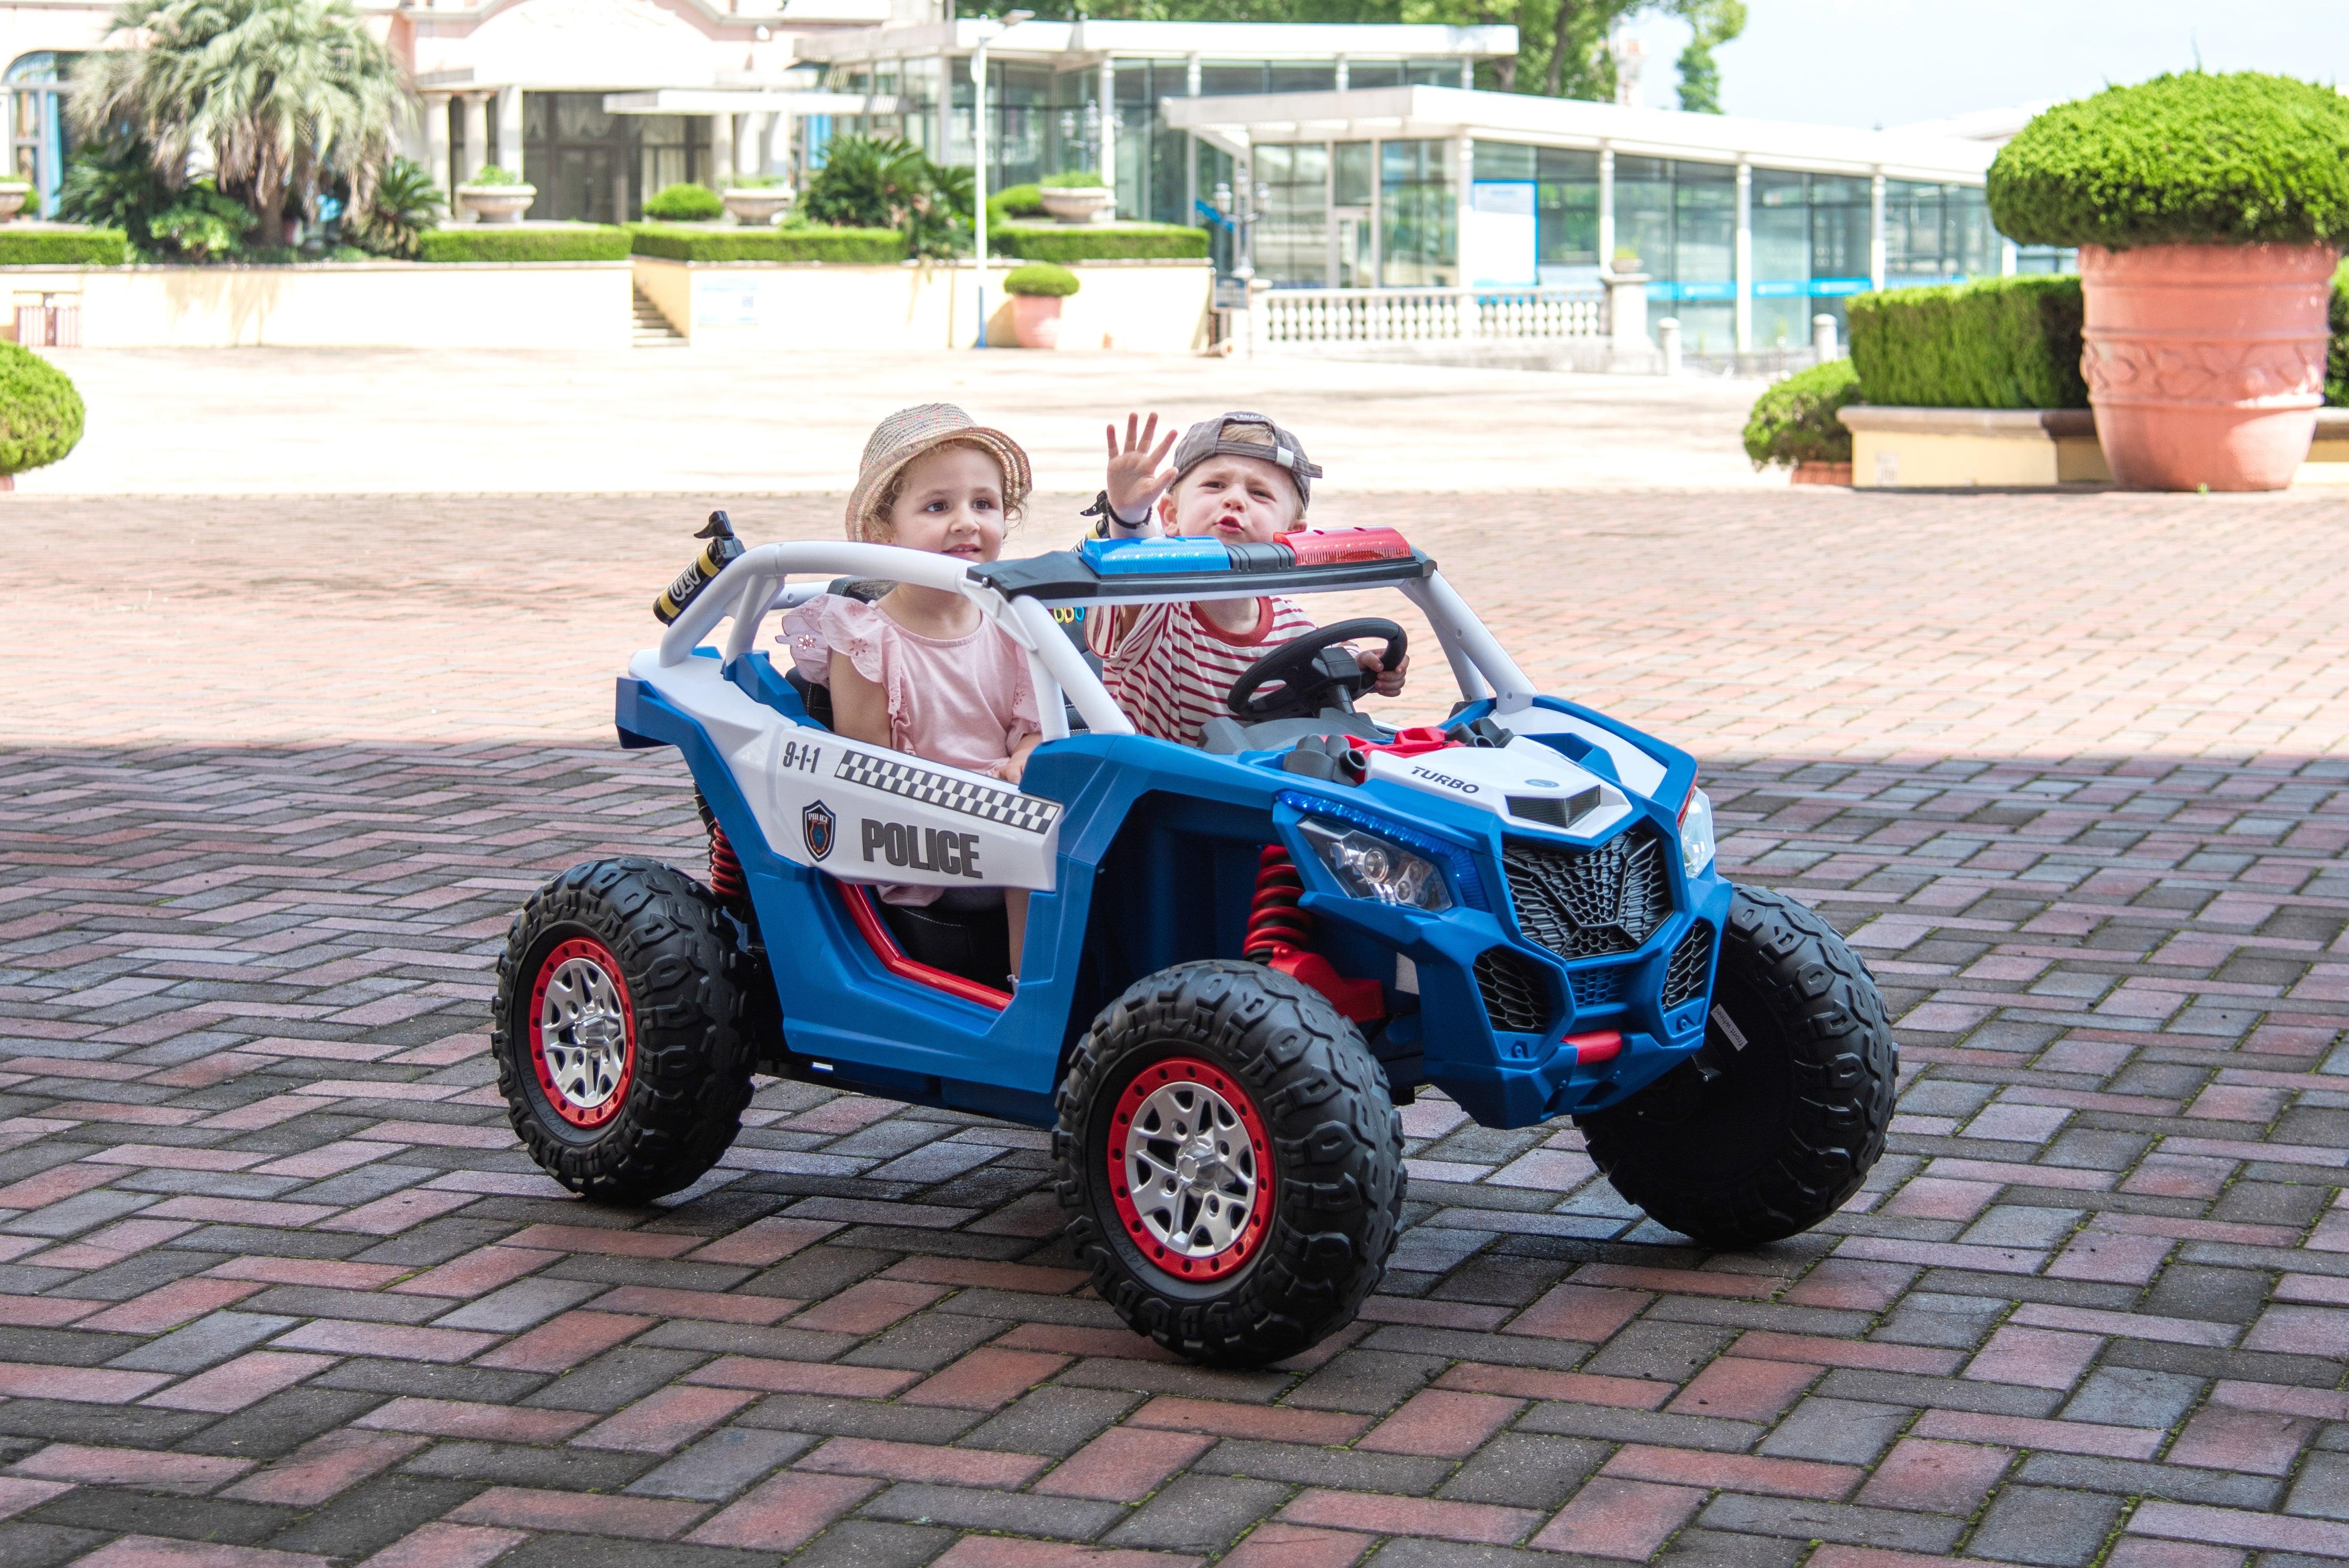 24V Freddo Storm Police UTV 2-Seater for Kids with Lights & Sirens for Action-Packed Adventures - DTI Direct USA